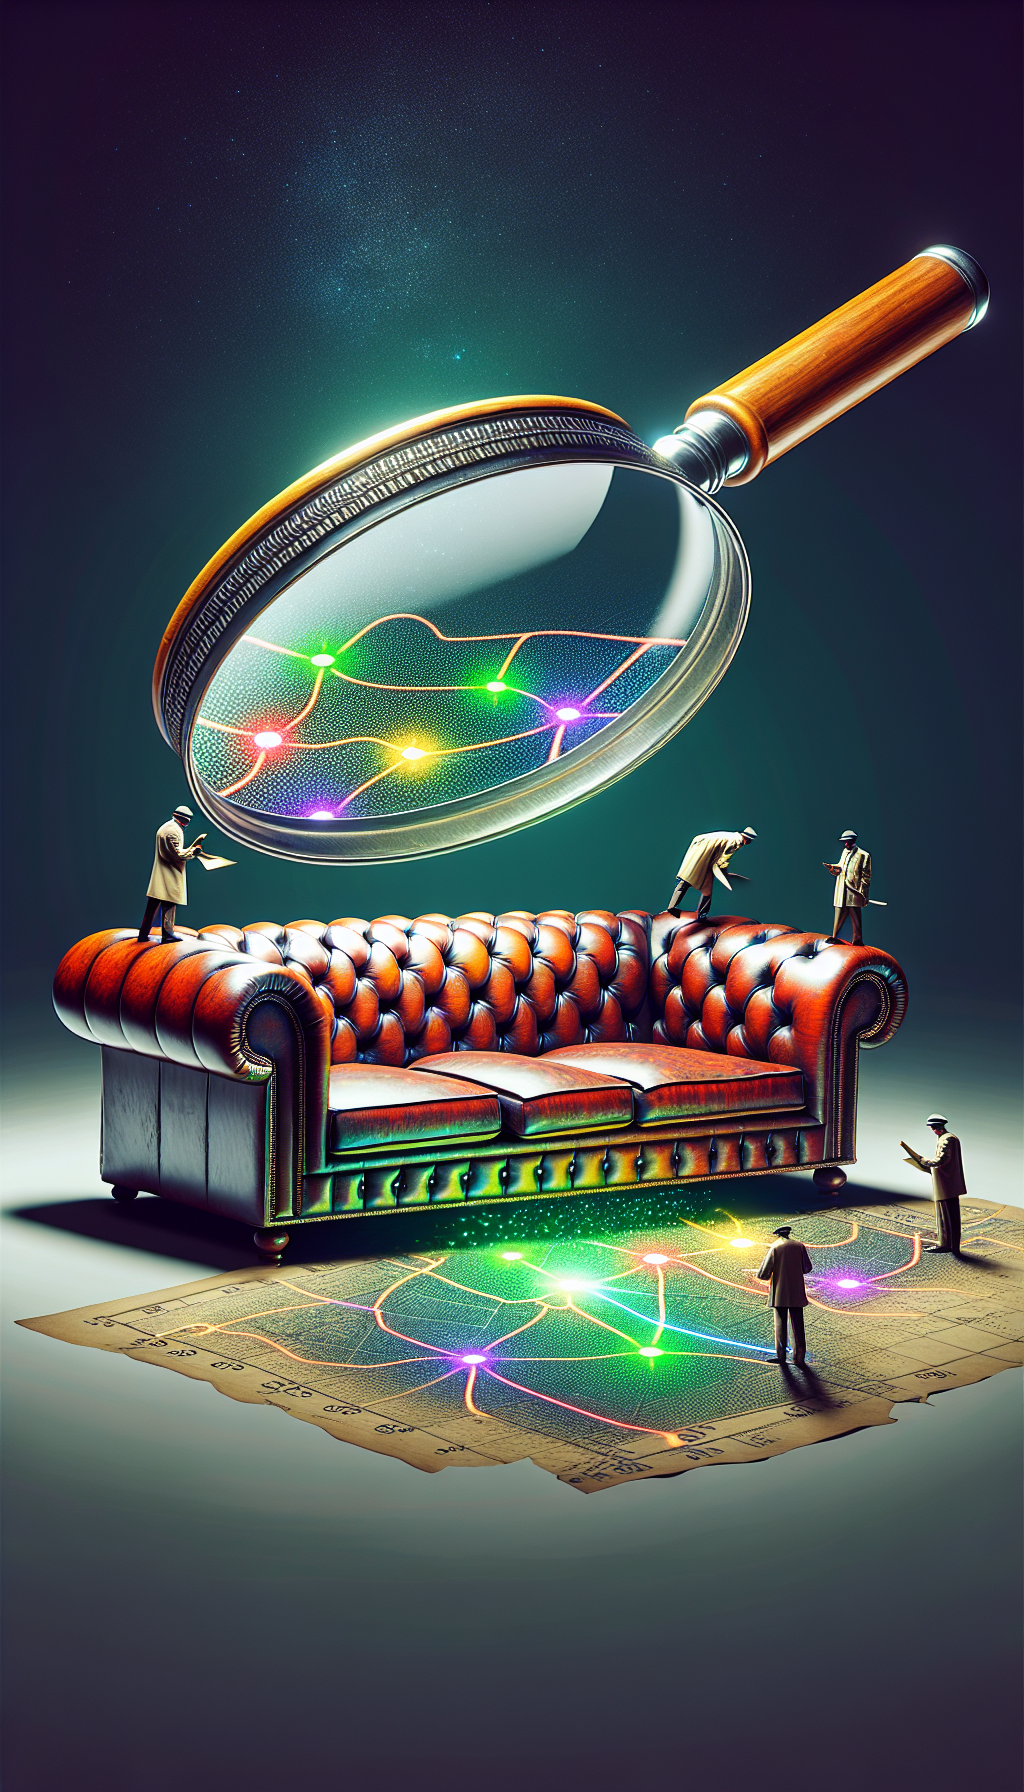 An illustration depicts a magnifying glass hovering over a classic Chesterfield sofa, where miniature local appraisers, like detectives, are examining the upholstery and woodwork. The magnifying glass projects a bright map beneath it, highlighting nearby locations with glowing dots, symbolizing the search for 'antique furniture appraisal near me.' The style alternates between detailed realism for the magnifying glass and charming, abstract representations for the appraisers and map.